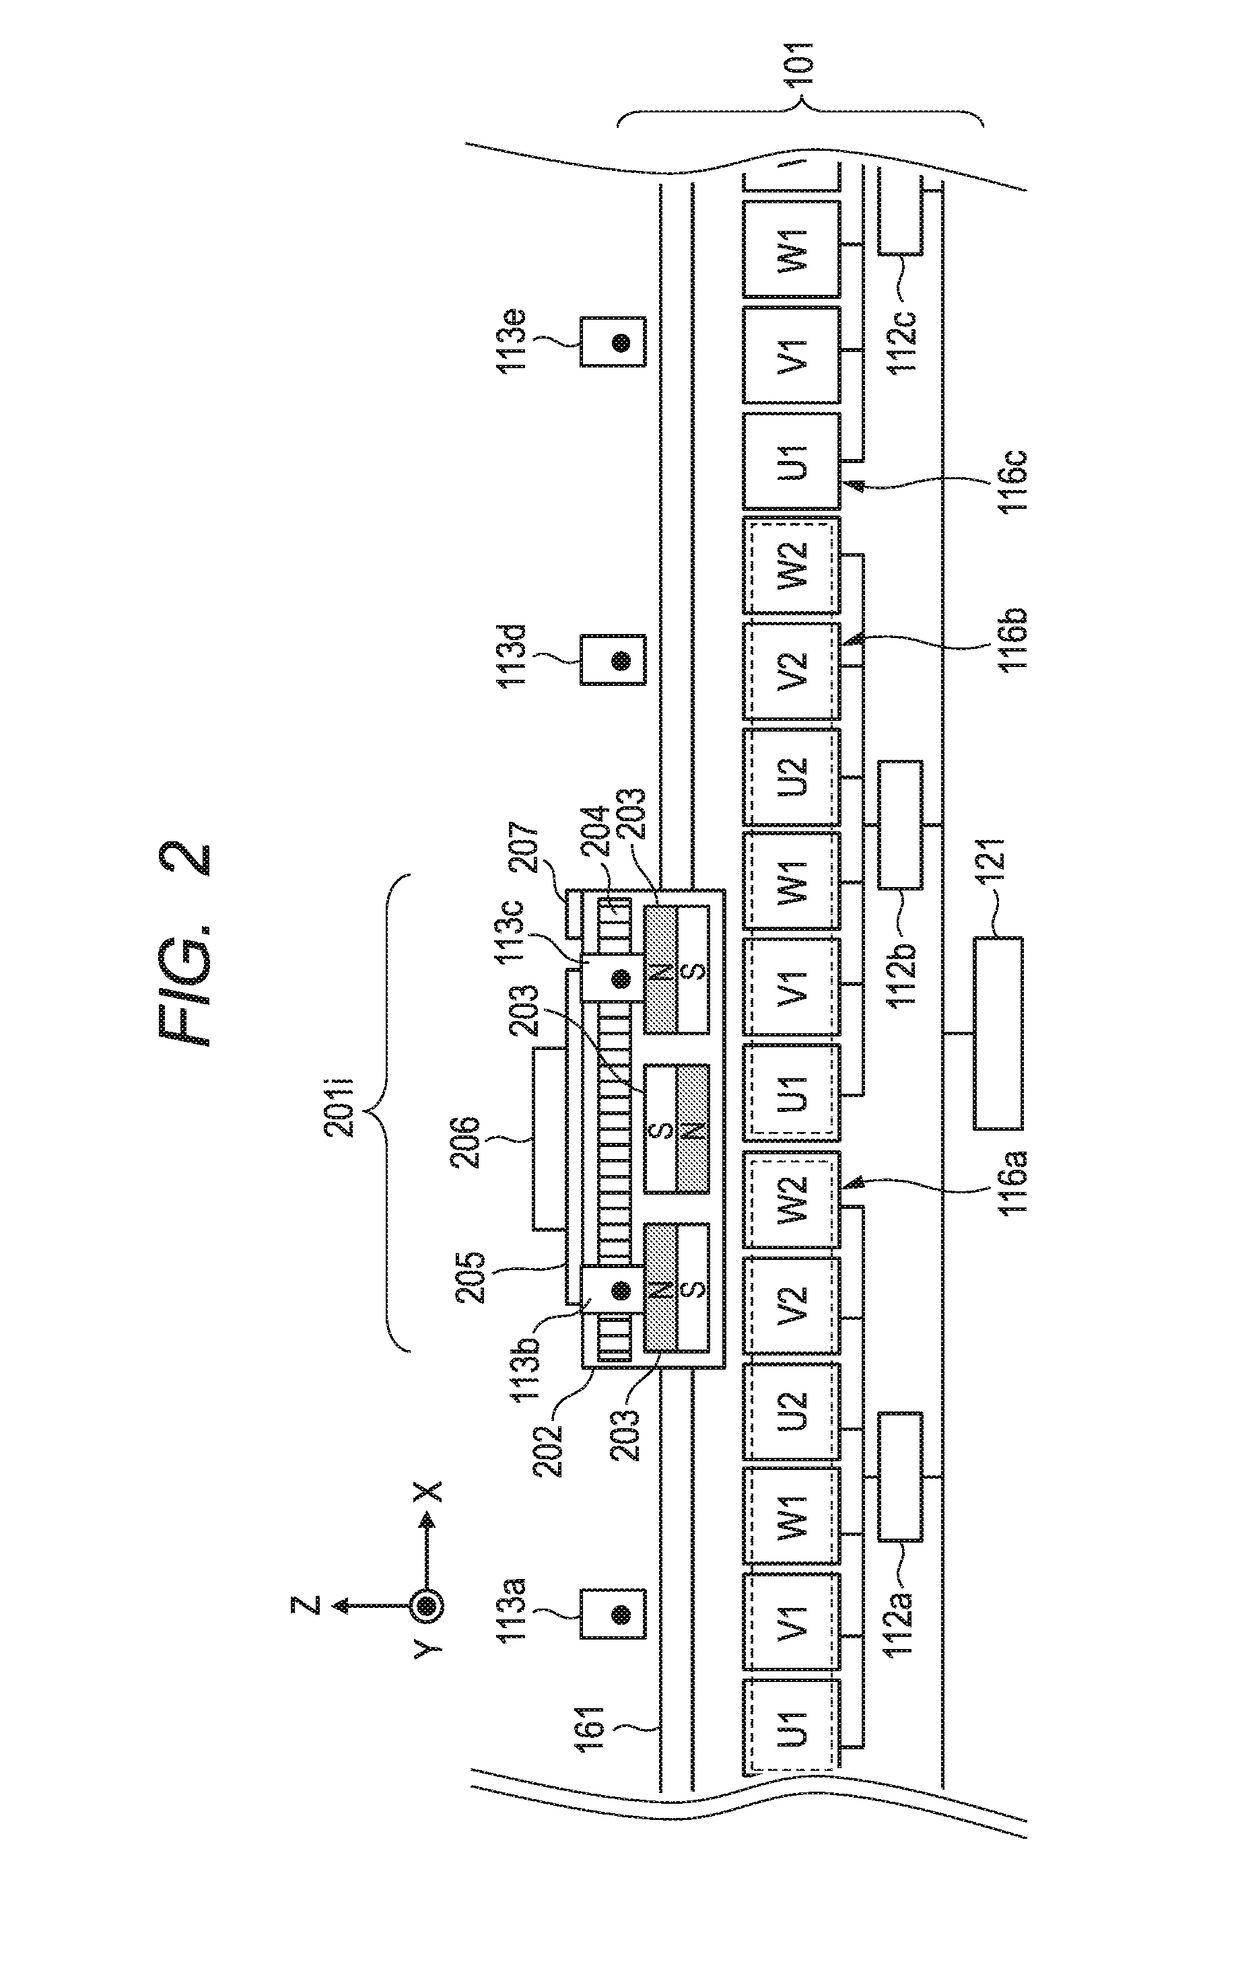 Moving-magnet type linear motor controlling system and manufacturing method of parts